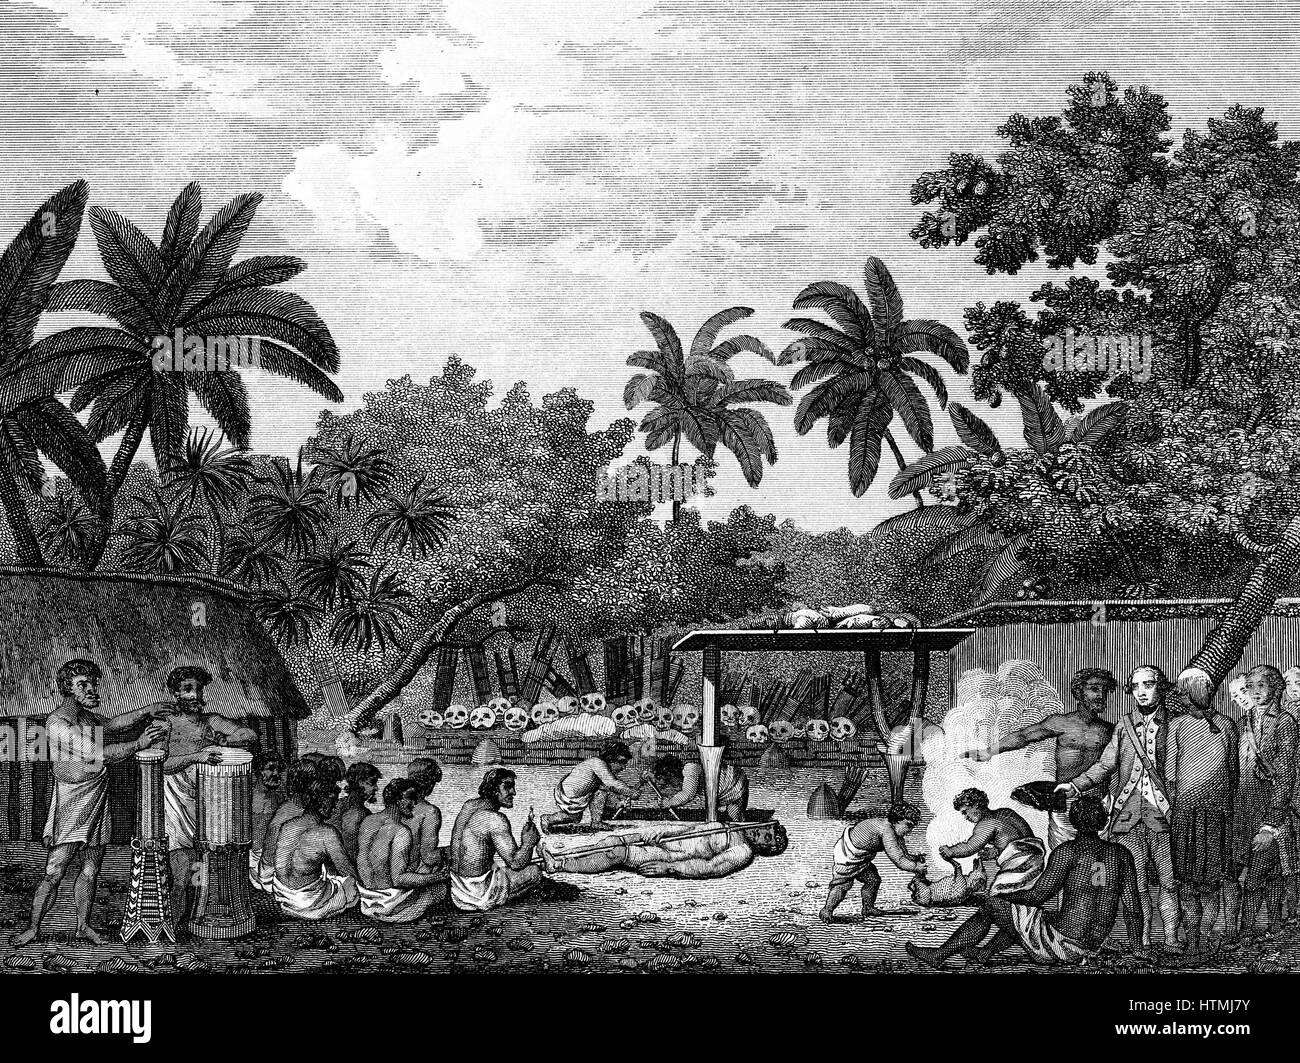 James Cook (1728-79) English navigator, witnessing human sacrifice in Taihiti (Otaheite) c1773 during his second Pacific voyage 1772-1775. Engraving from 1815 edition of Cook's 'Voyages'. Stock Photo